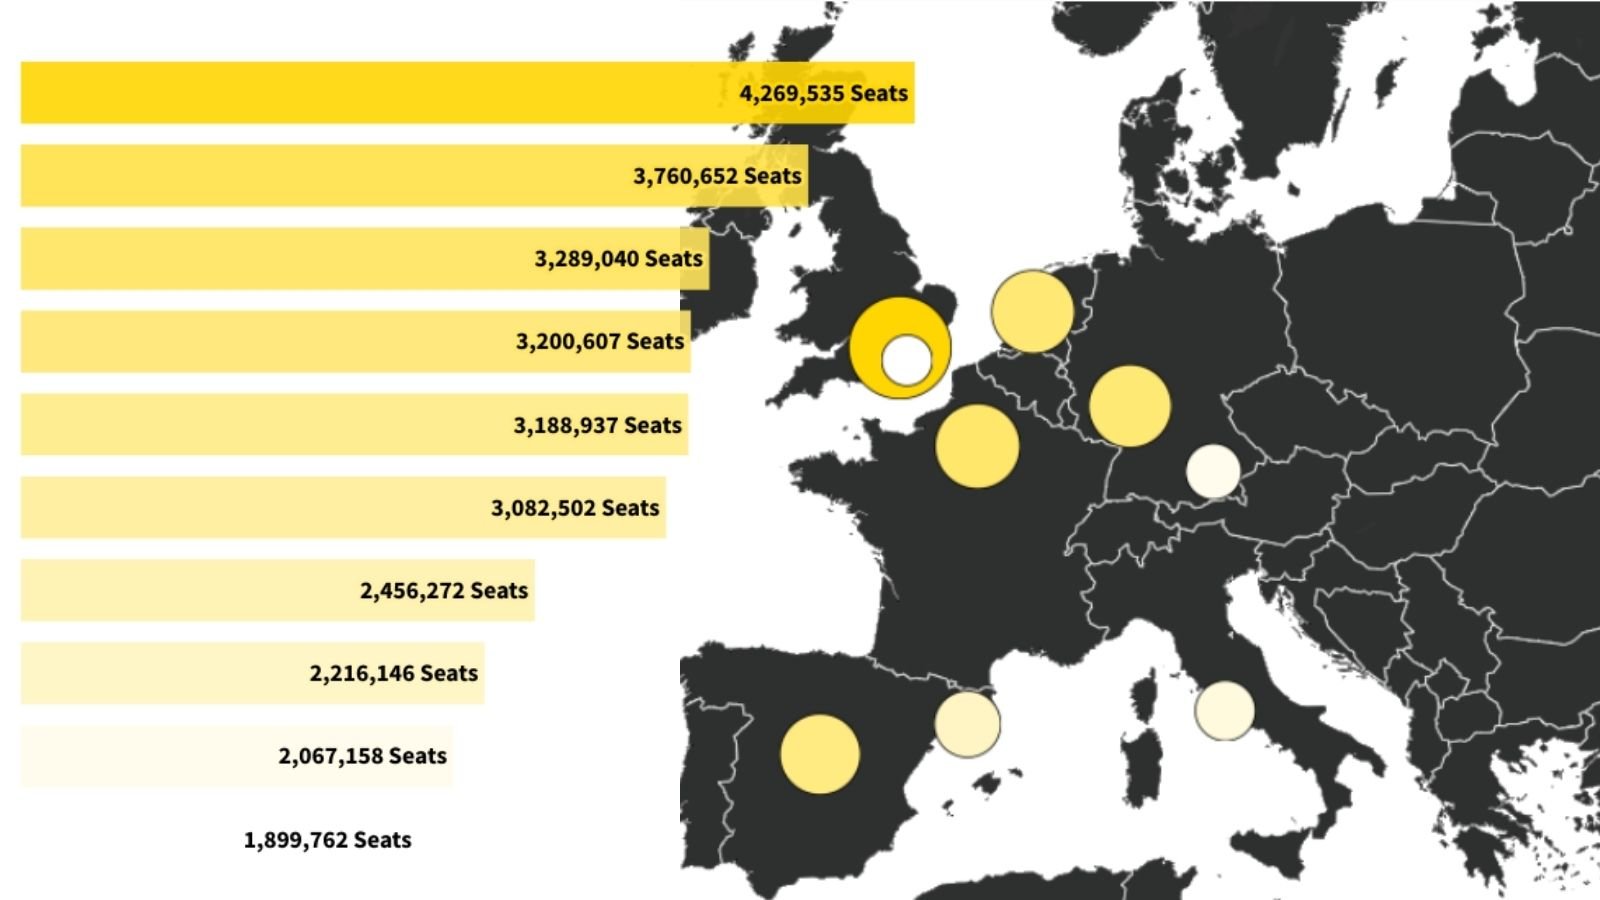 Europe's Busiest Airports Header